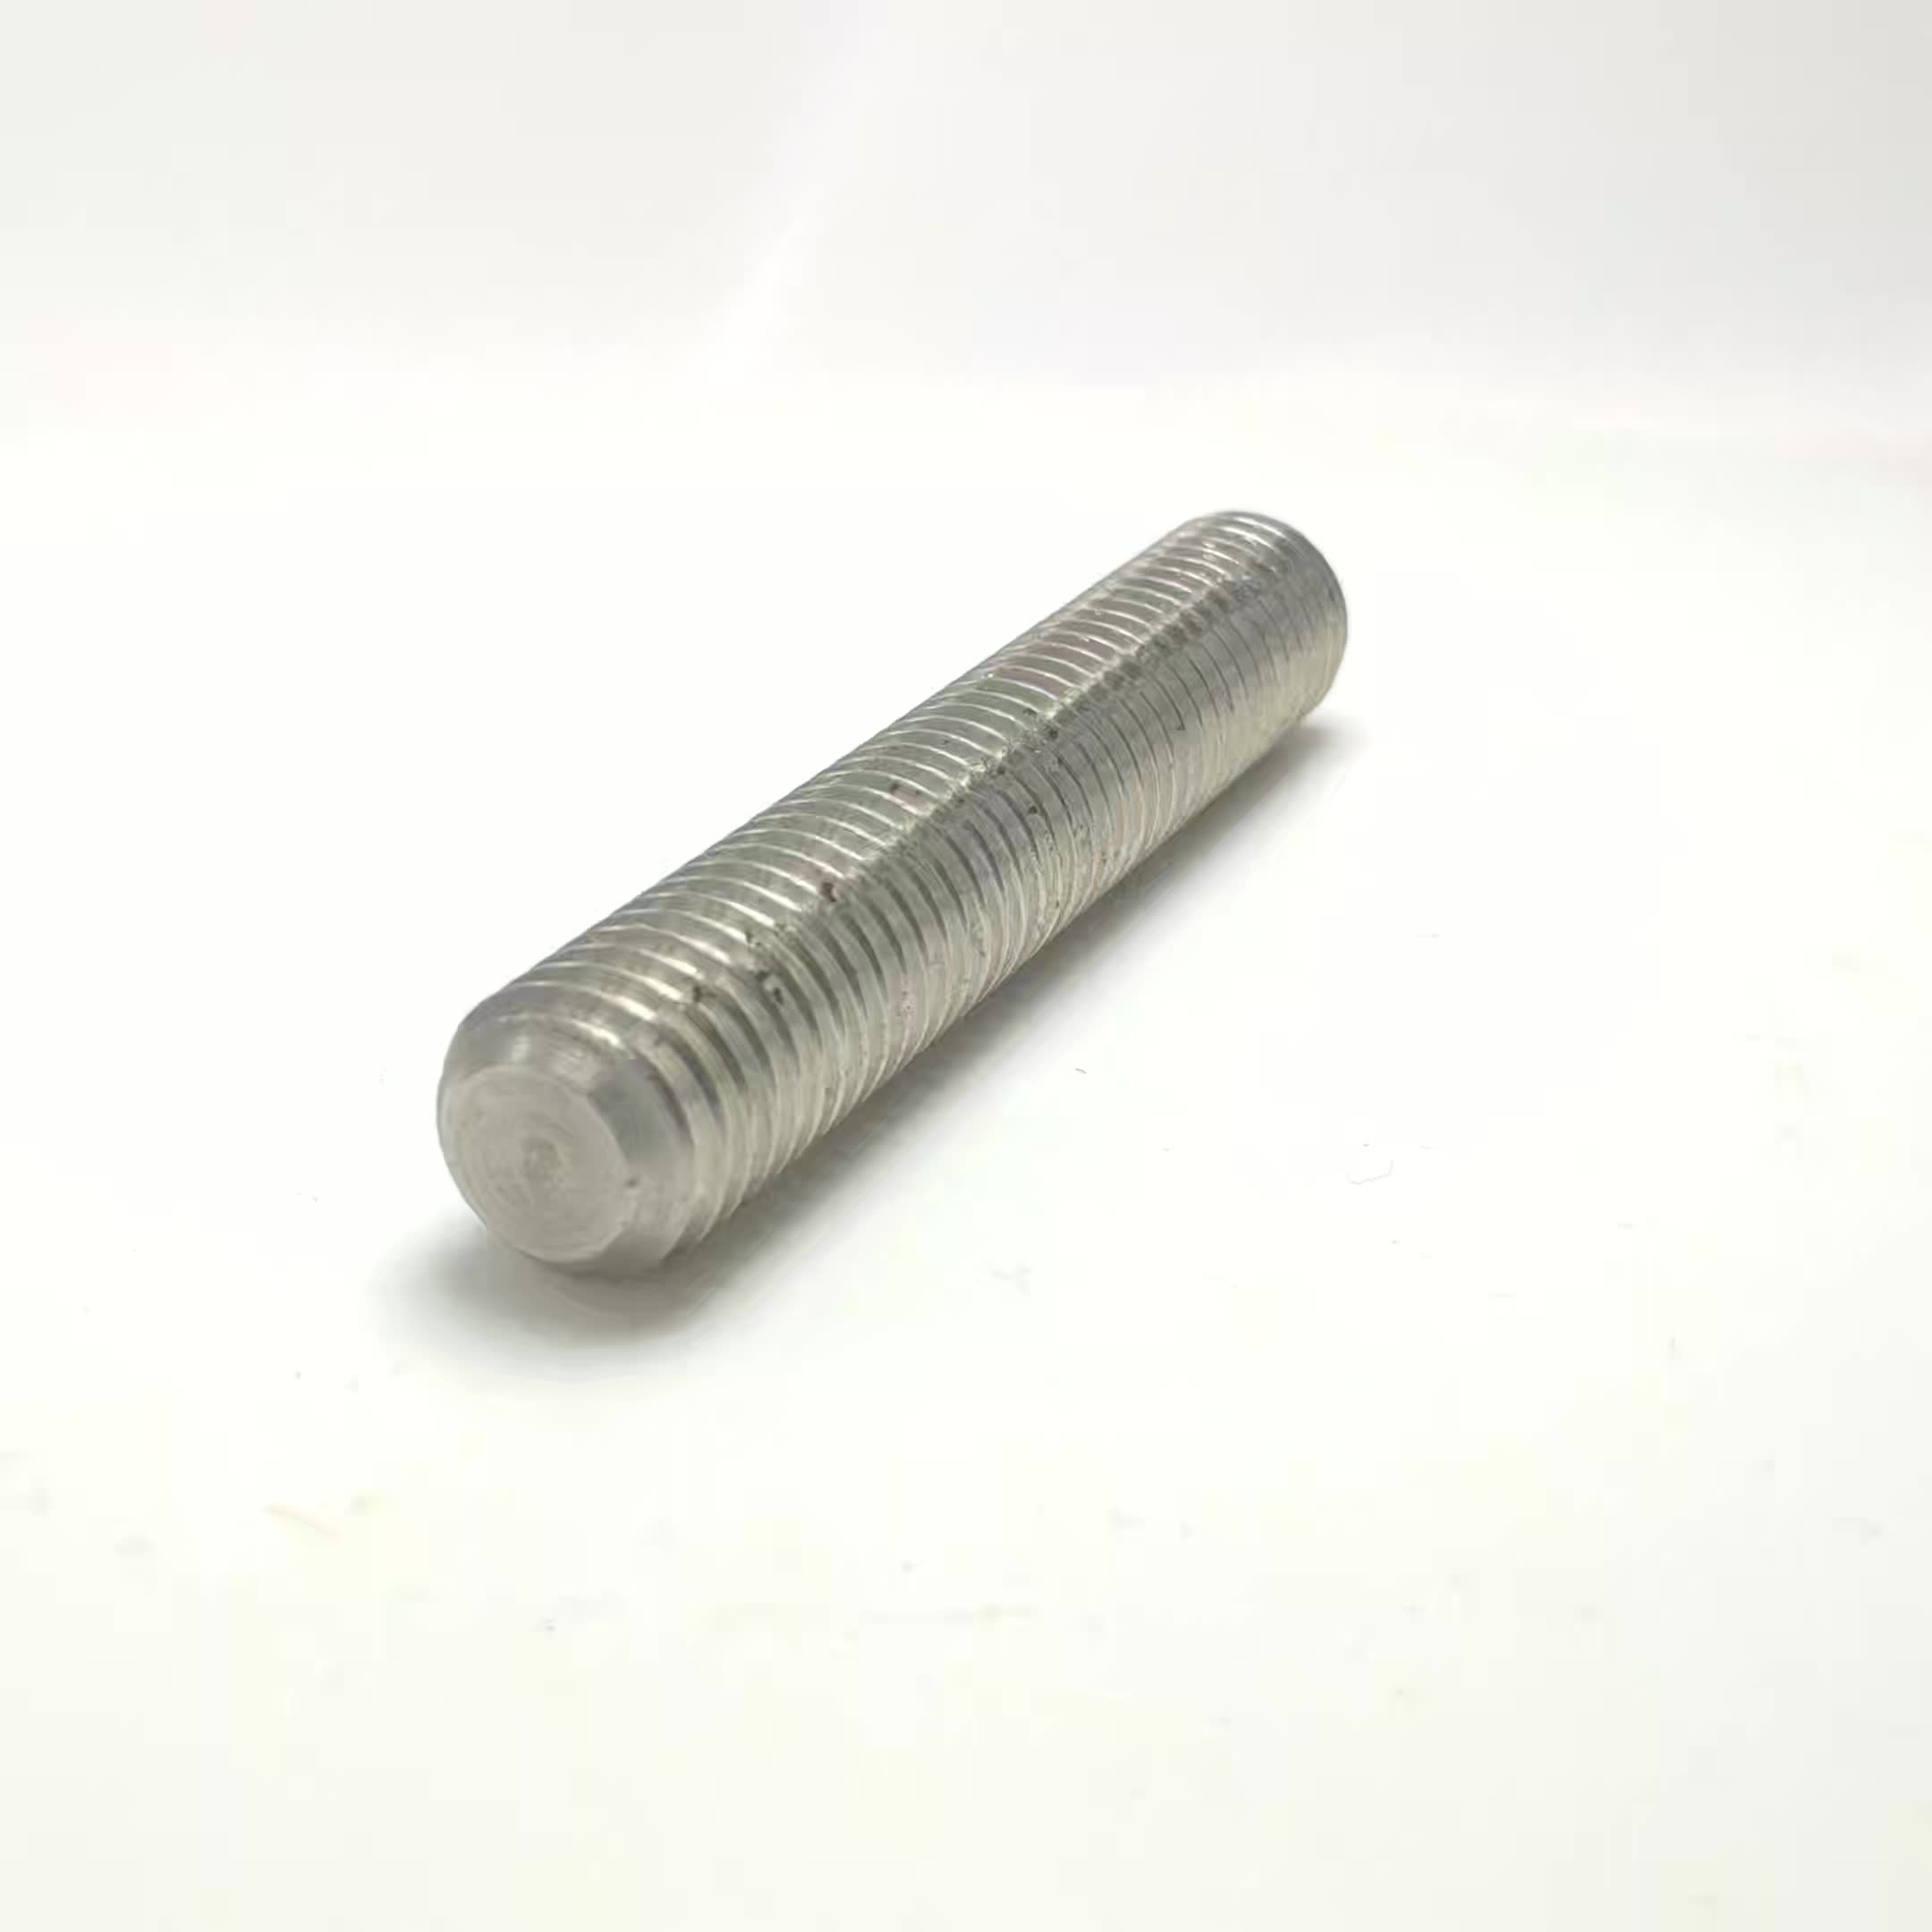 High Precision Stainless Steel Acme Threaded Rod Buy Stainless Steel Acme Threaded Rod